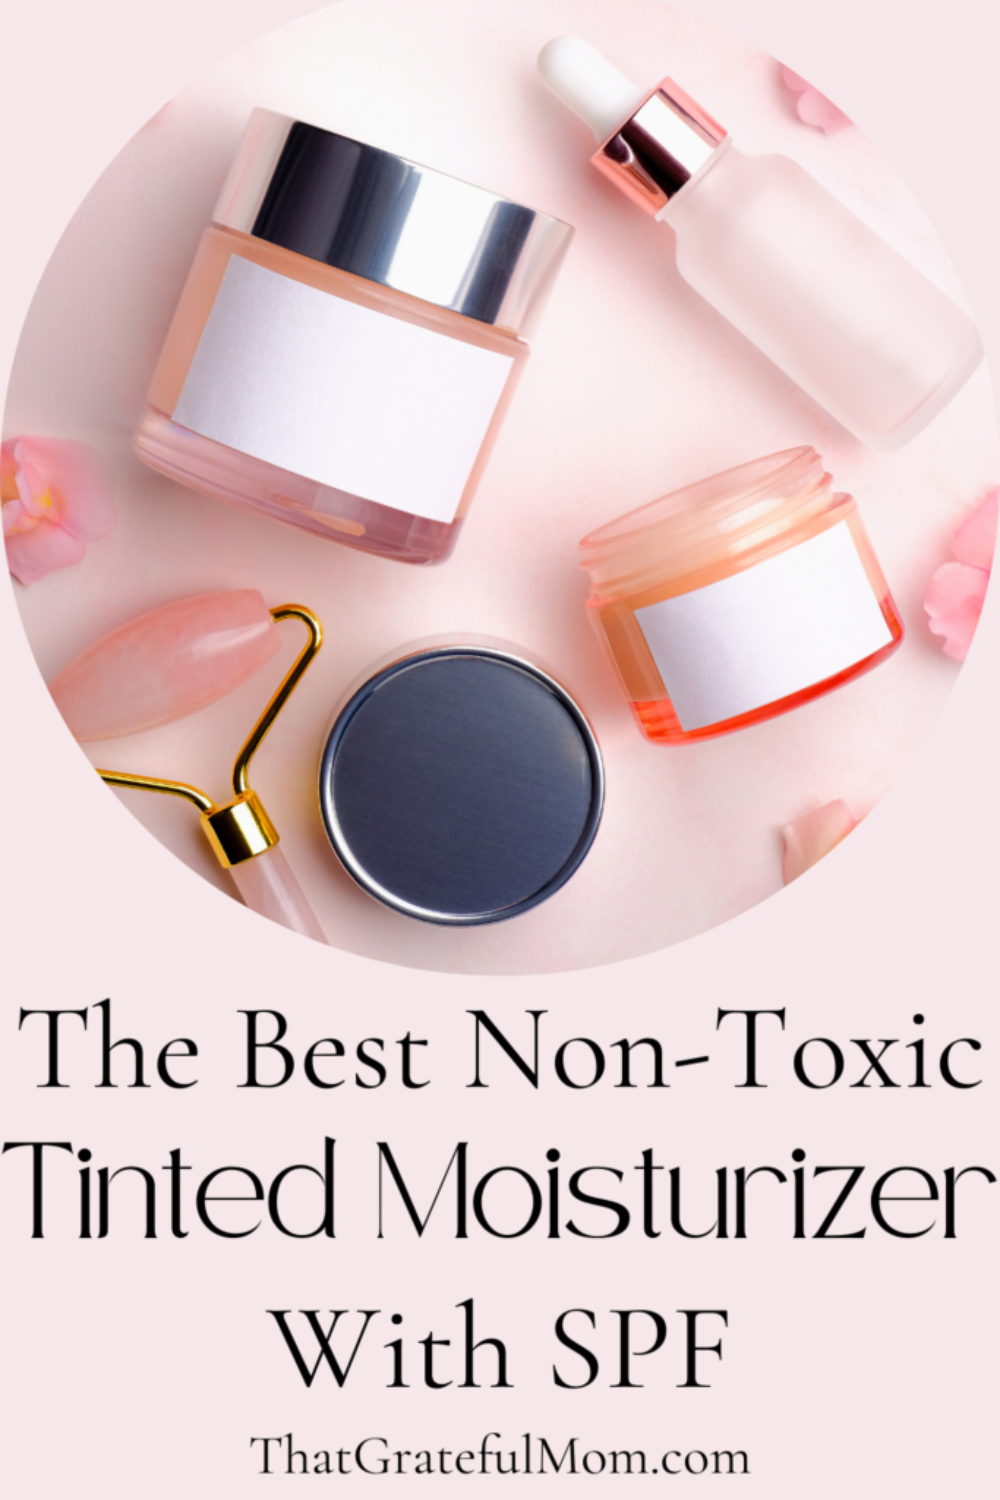 The best non-toxic tinted moisturizer pin 1